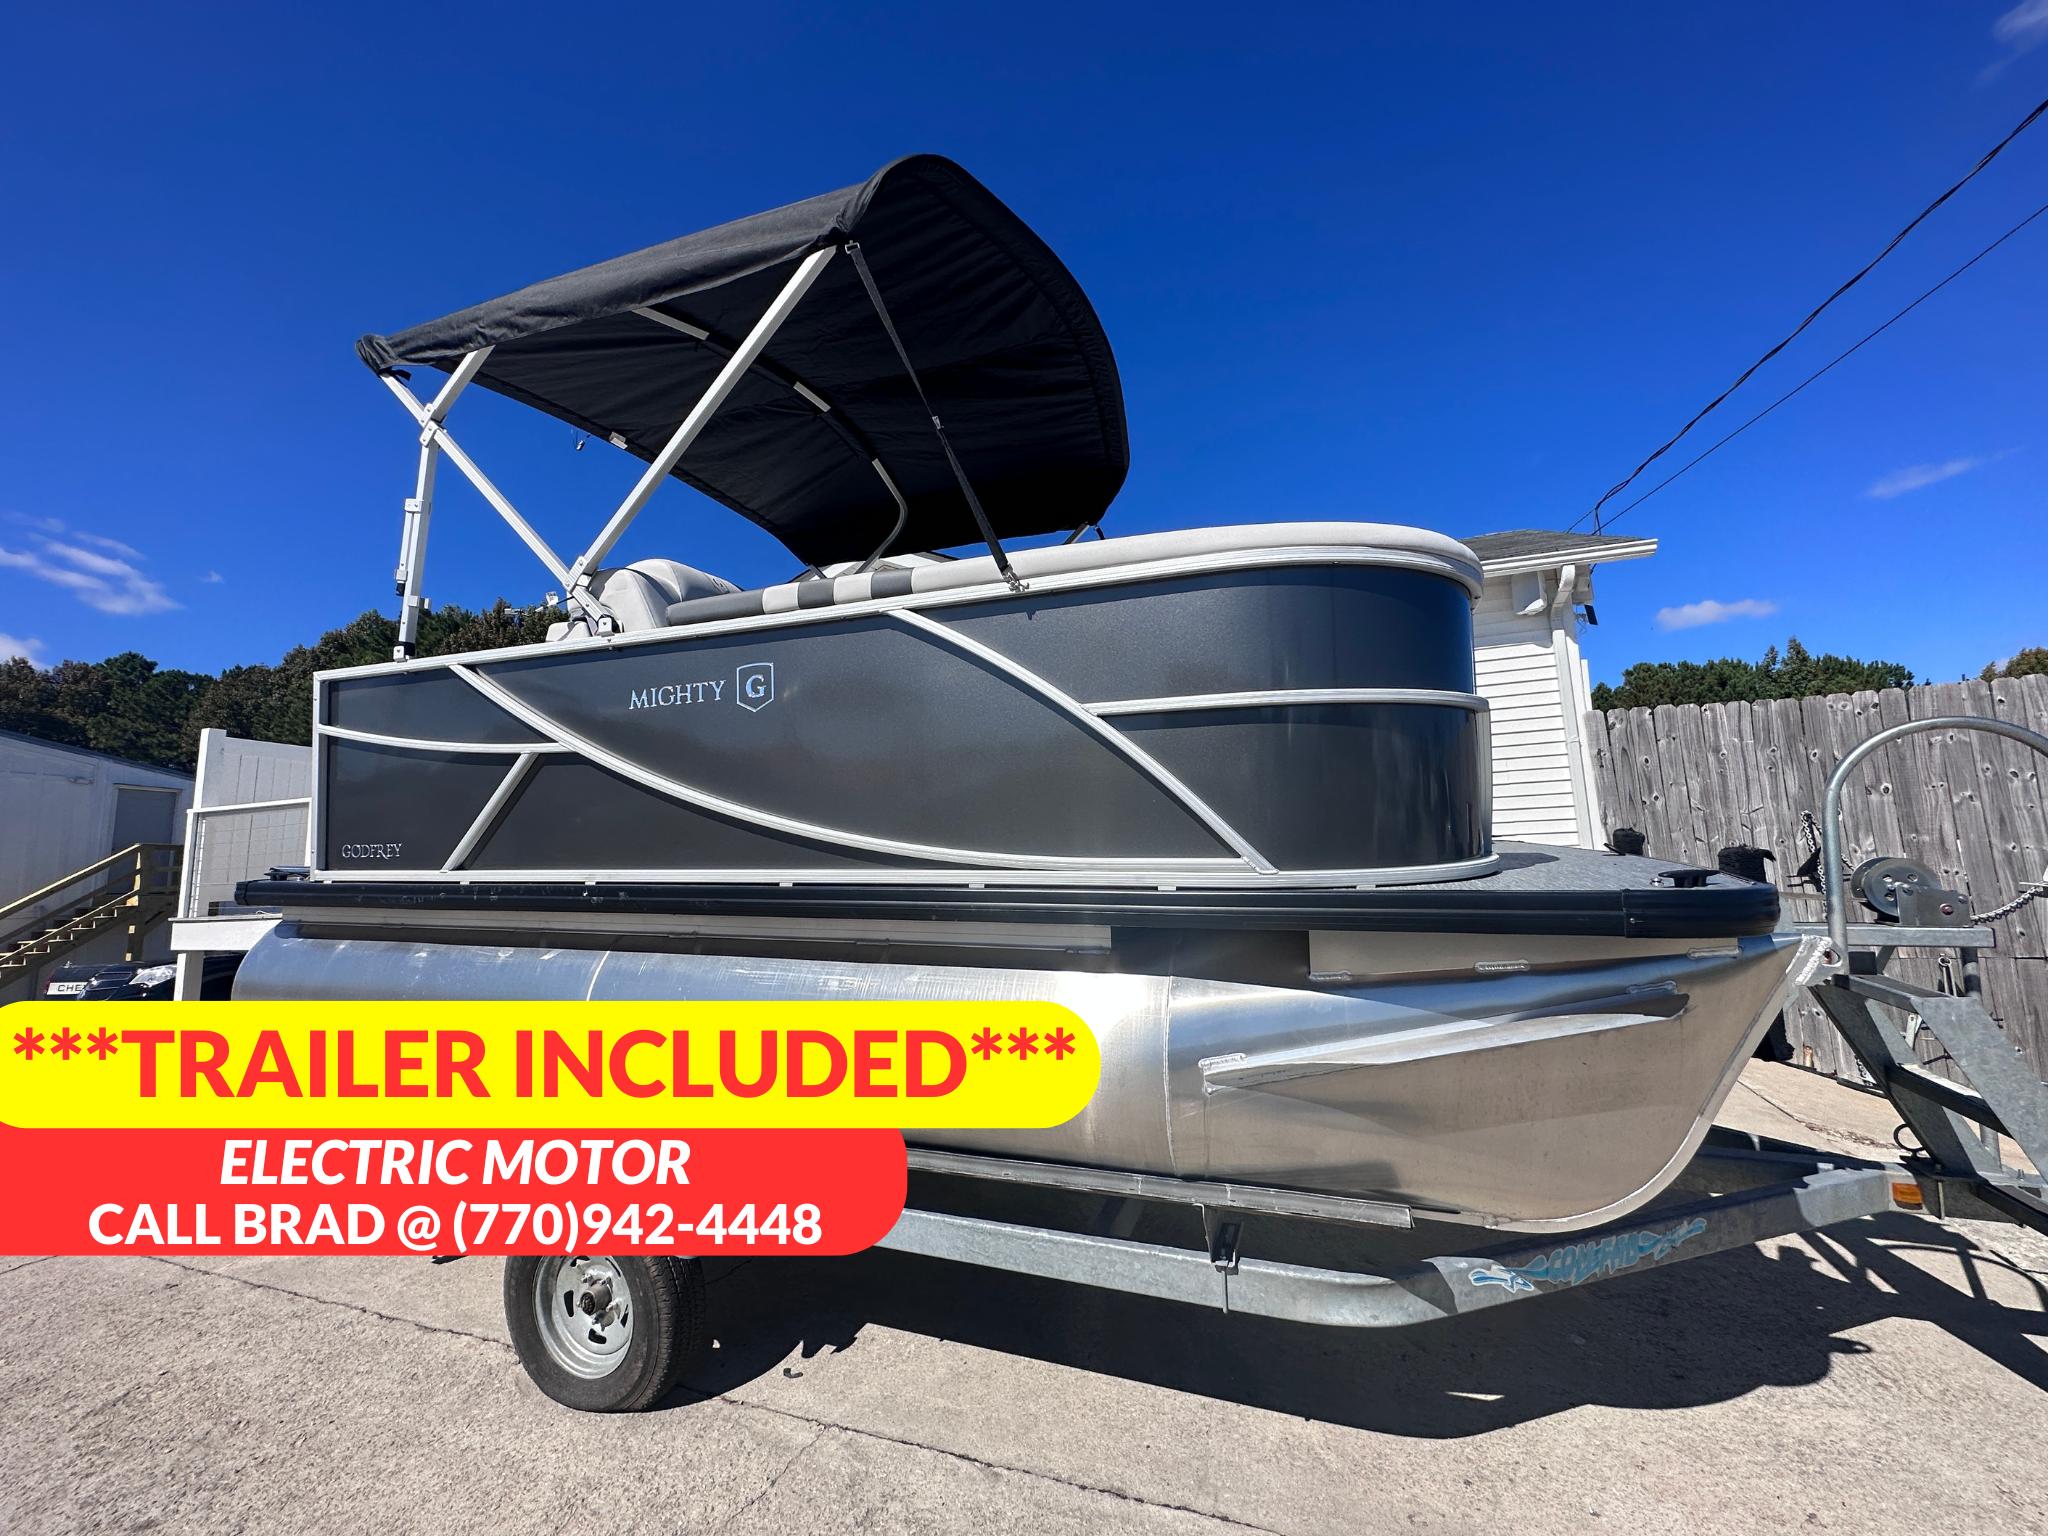 Electric boats - Boat Trader